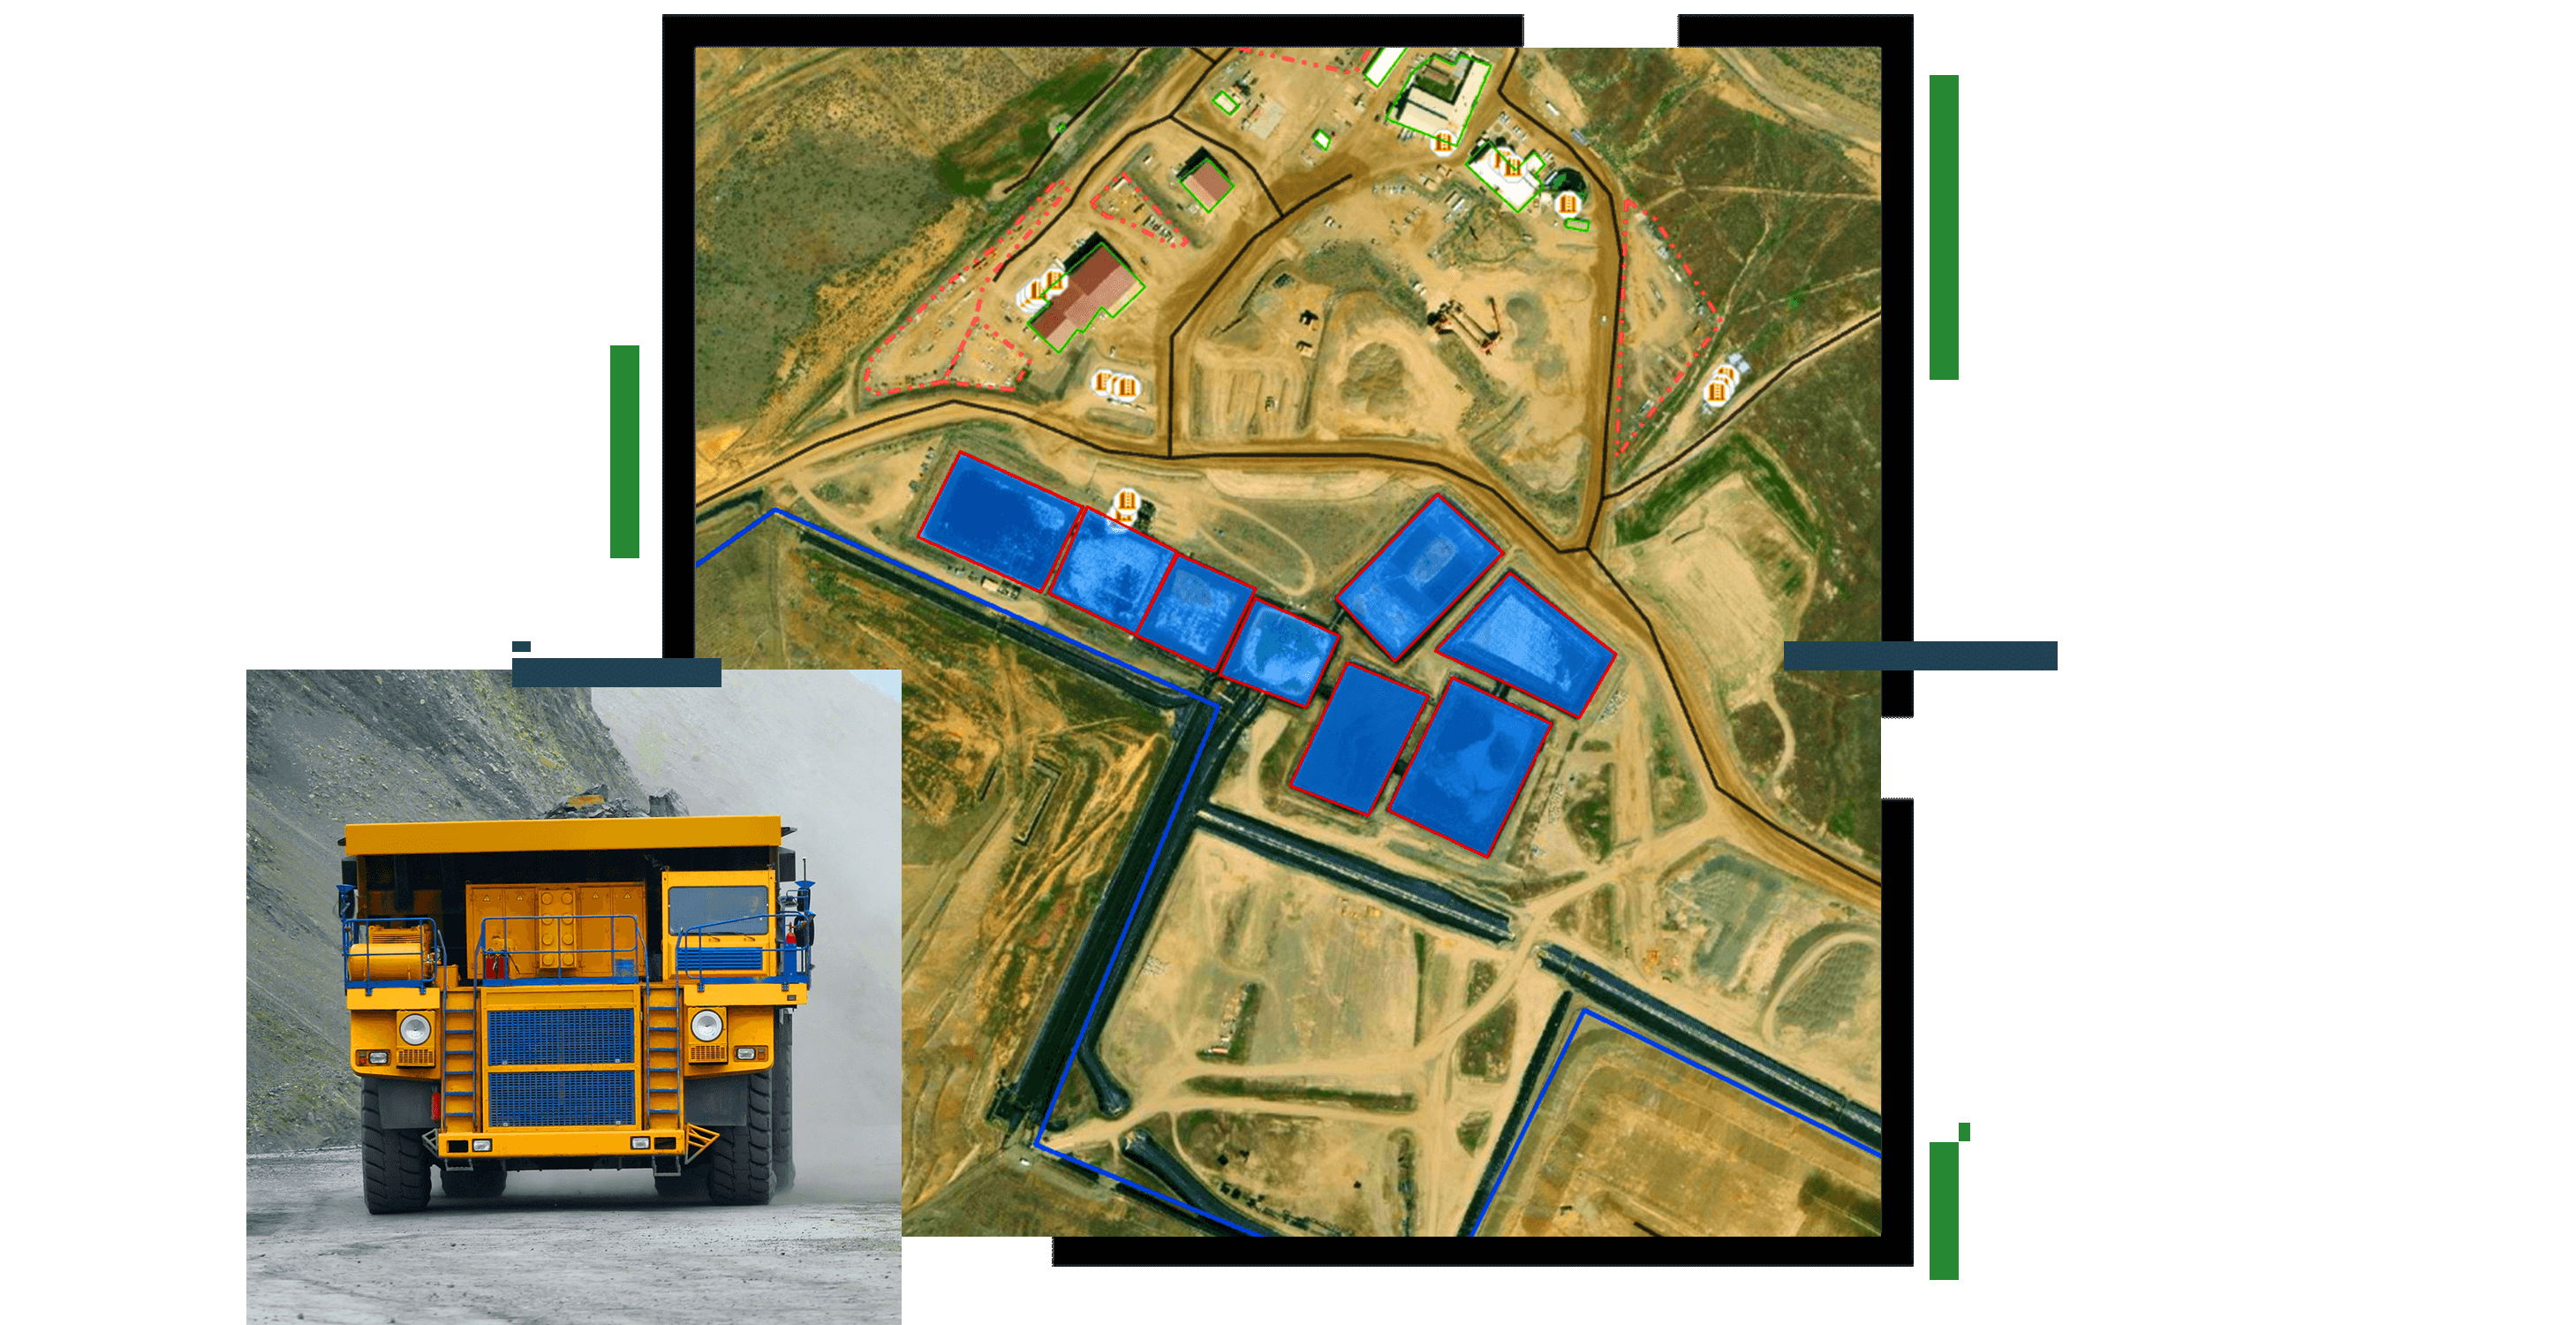 Giant yellow dump truck driving in a quarry, and a map outlining areas of interest in the quarry